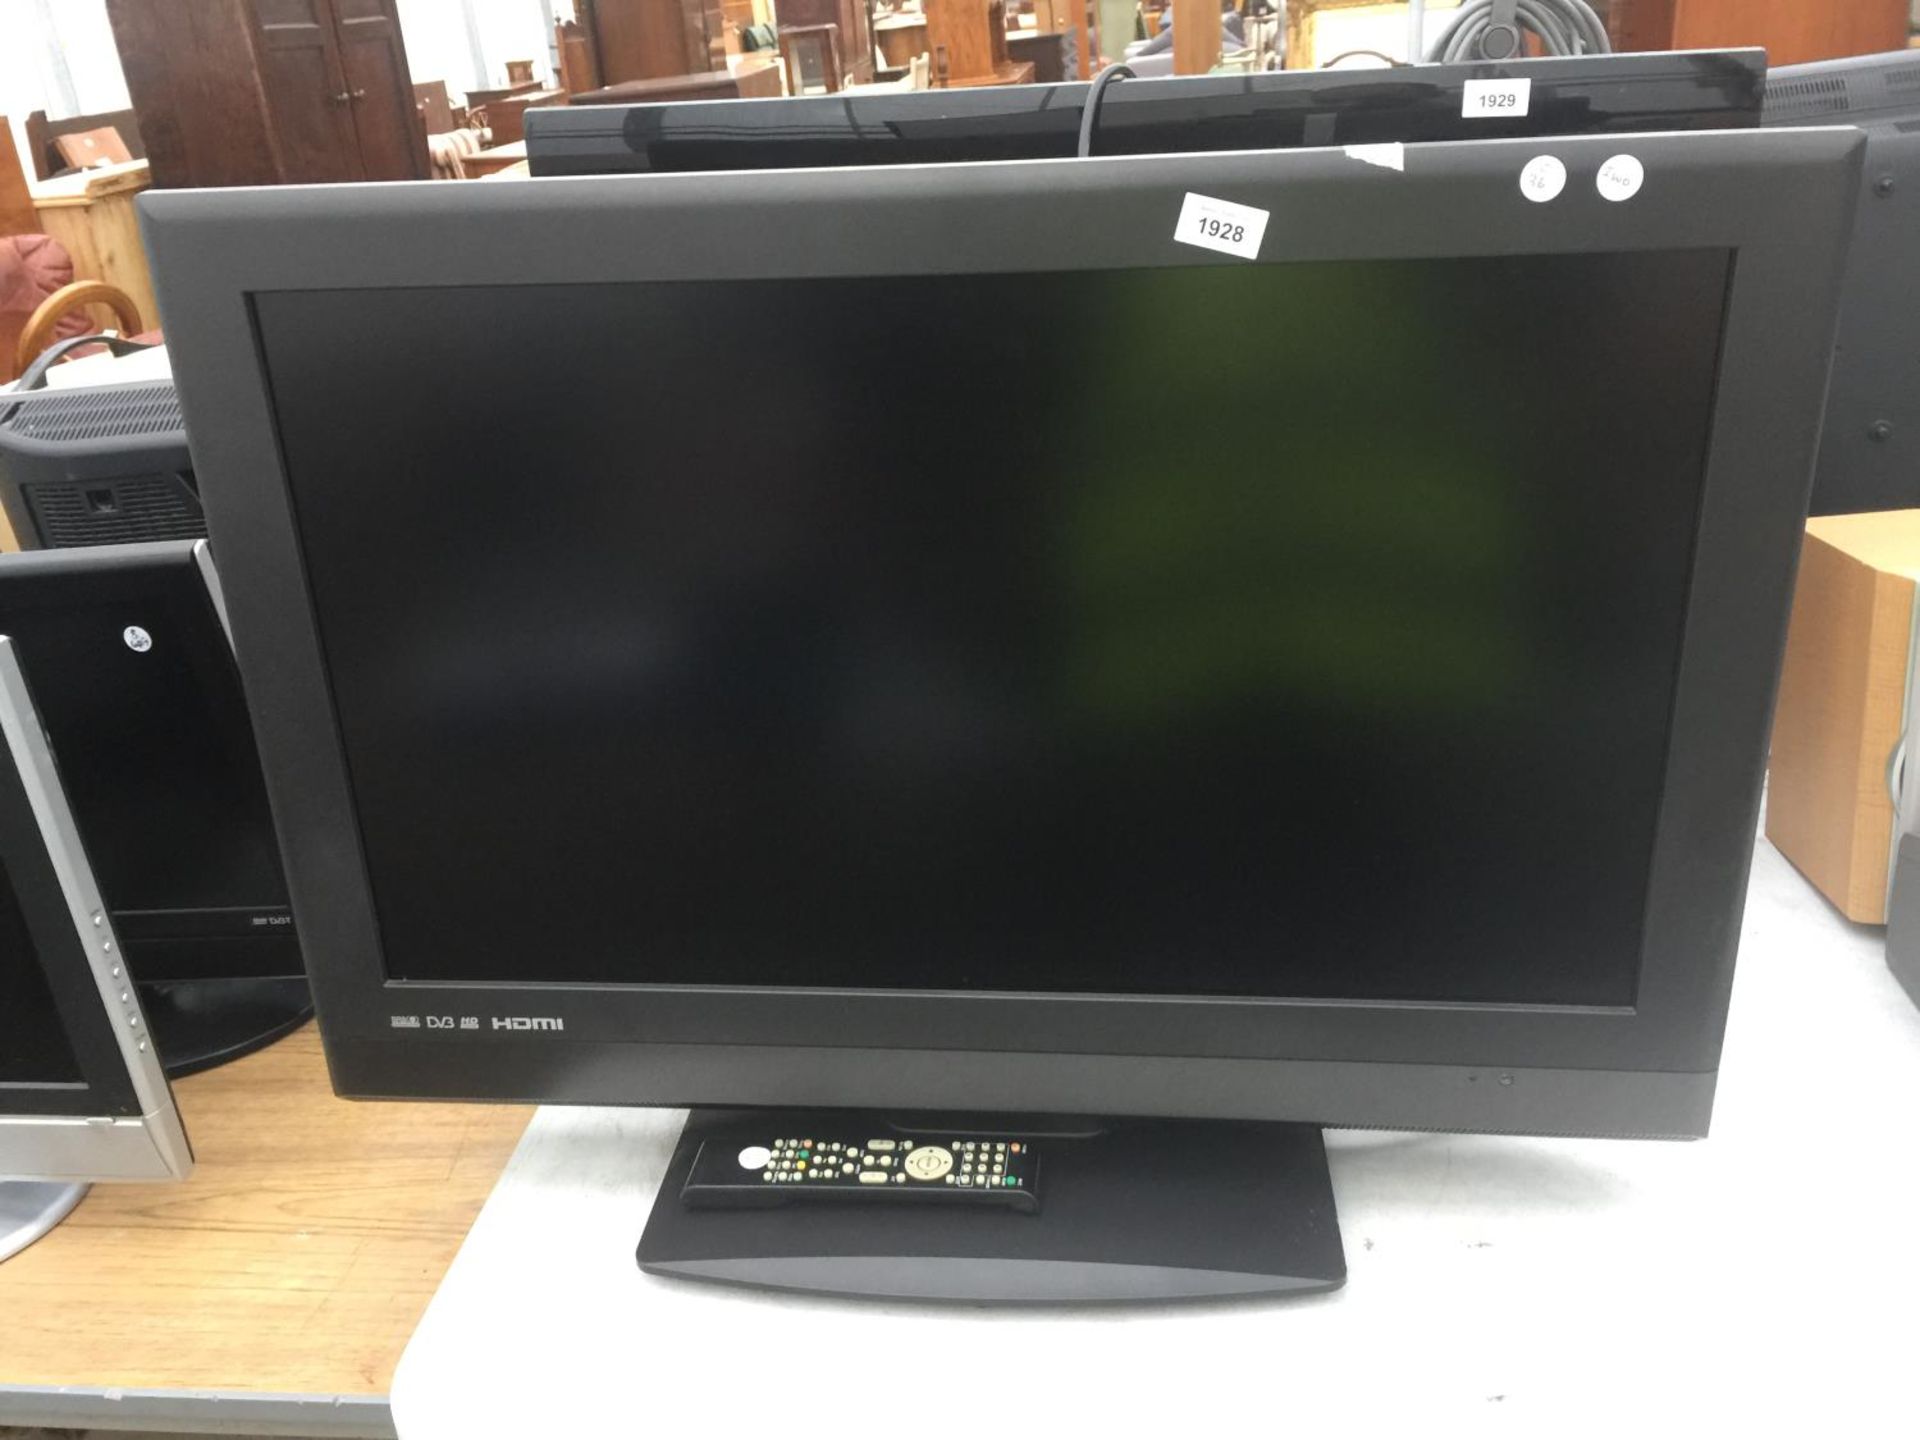 A 32" TEVION TELEVISION WITH REMOTE CONTROL